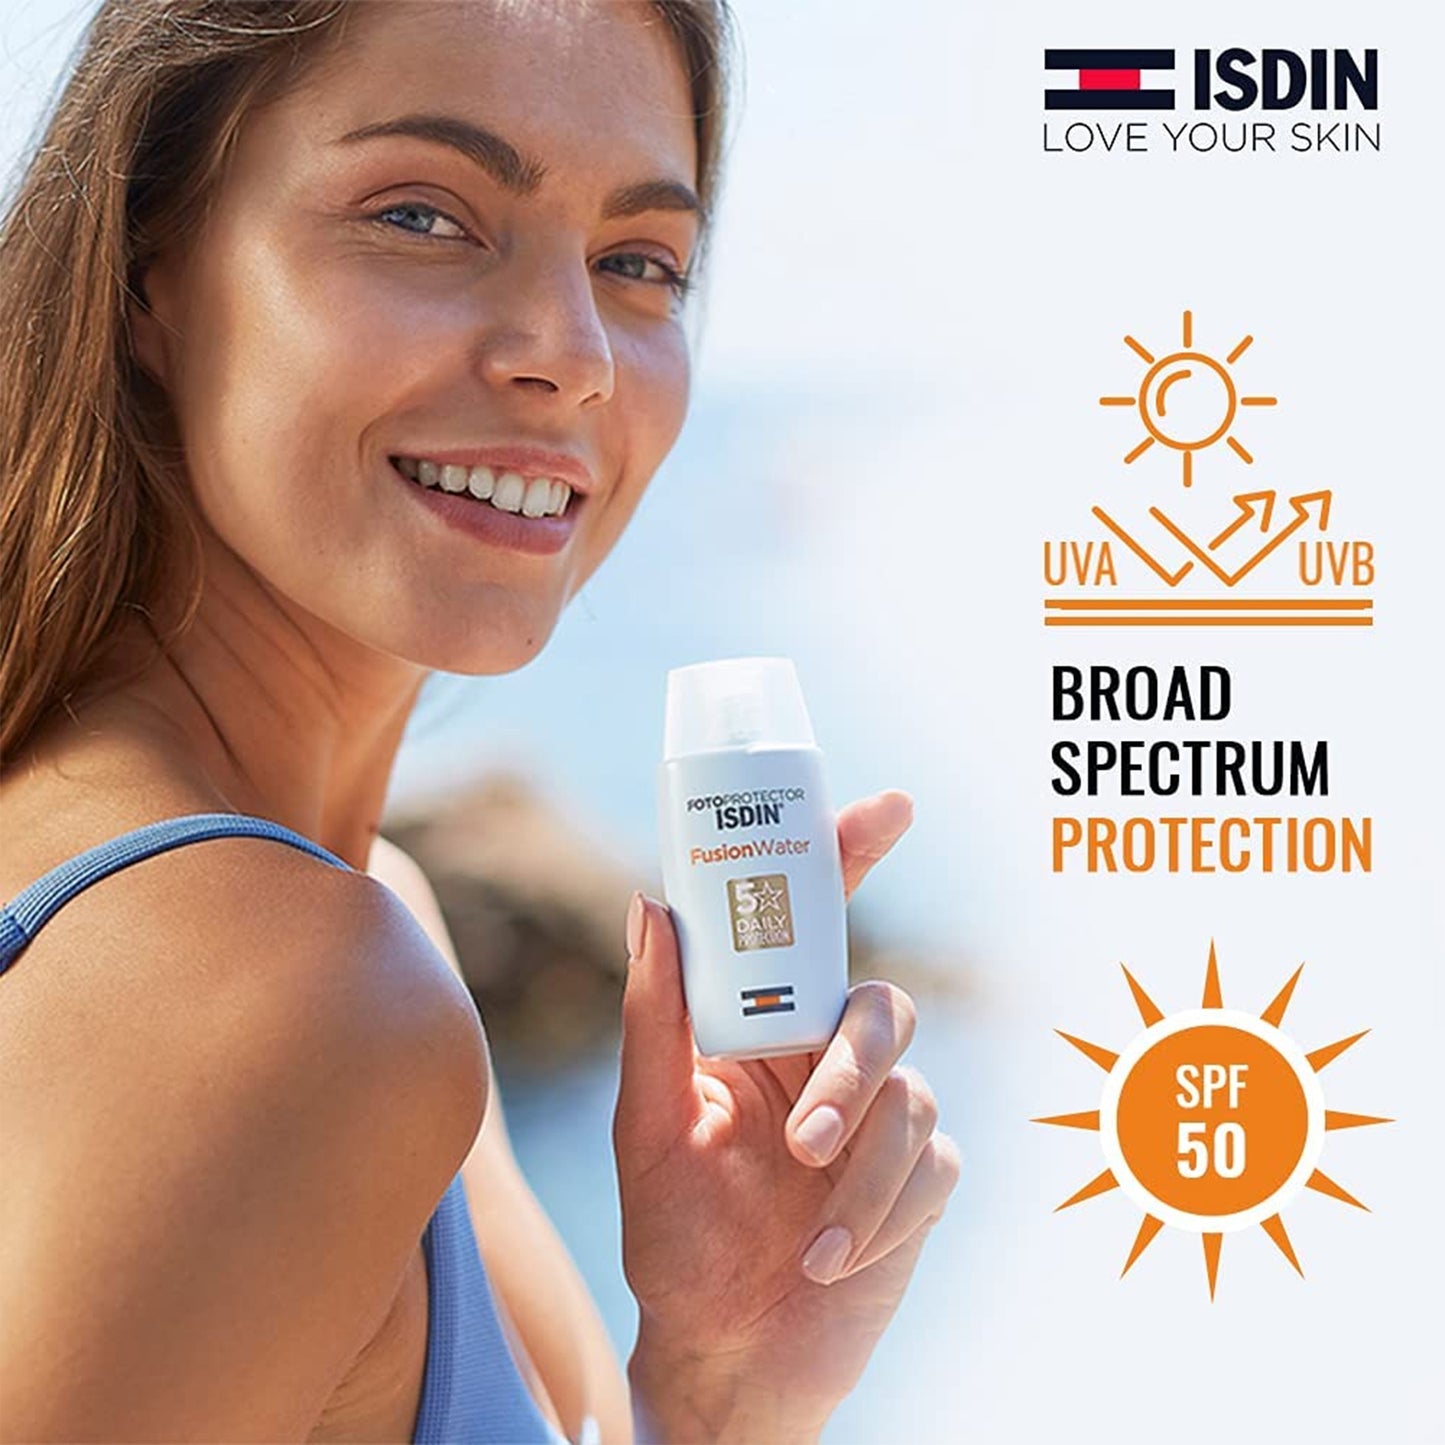 Fotoprotector Fusionwater SPF 50+, 50ml